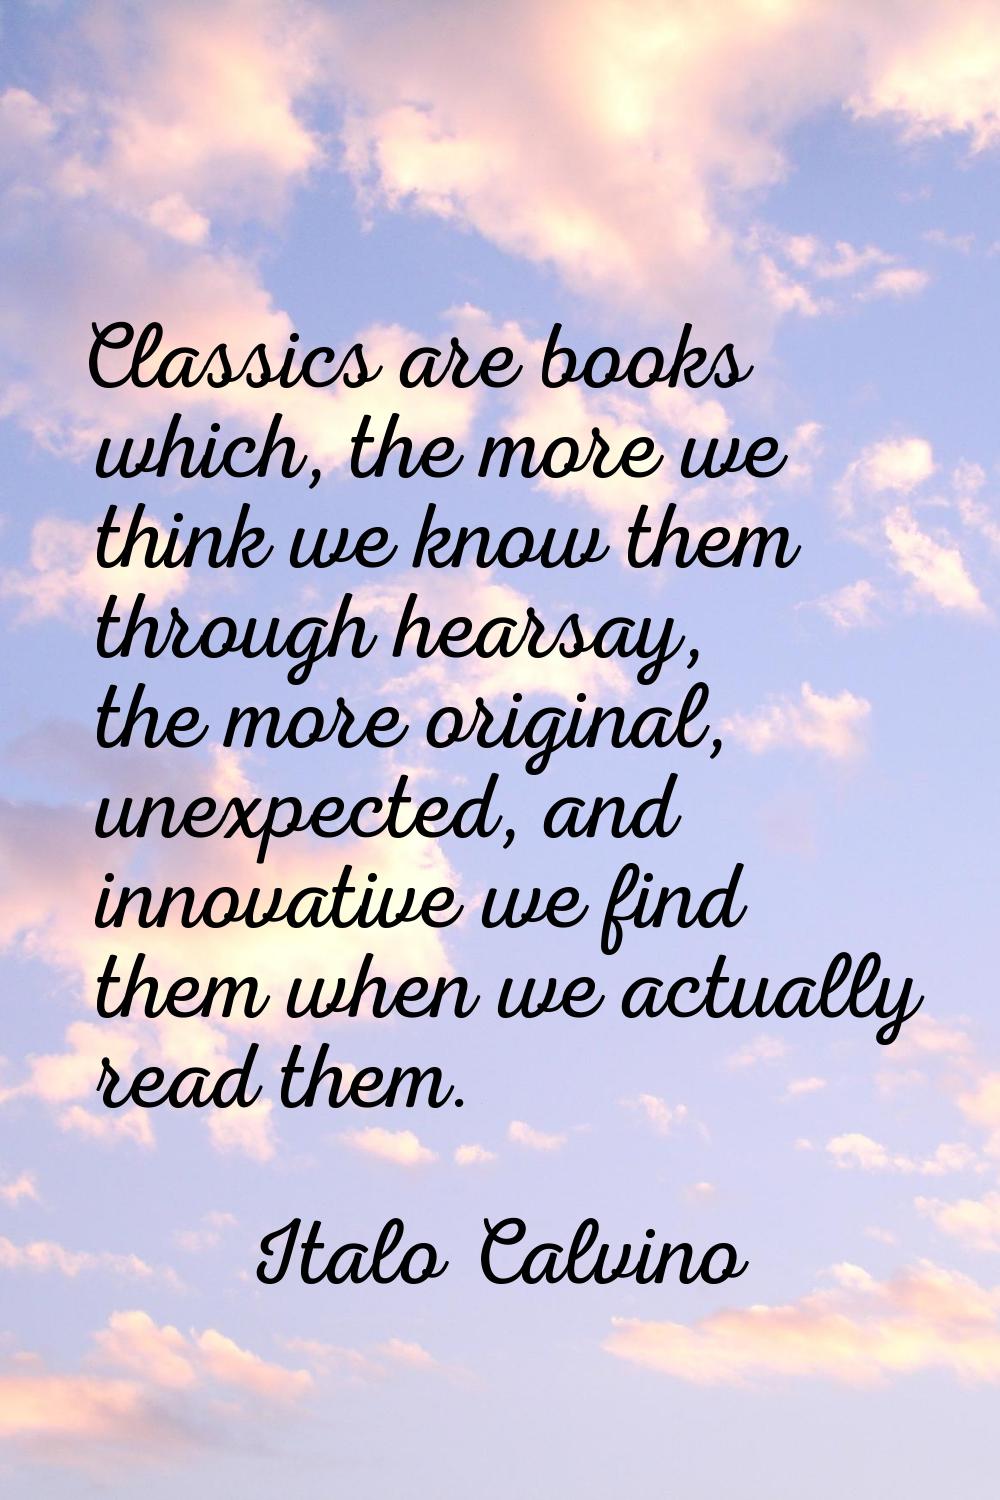 Classics are books which, the more we think we know them through hearsay, the more original, unexpe